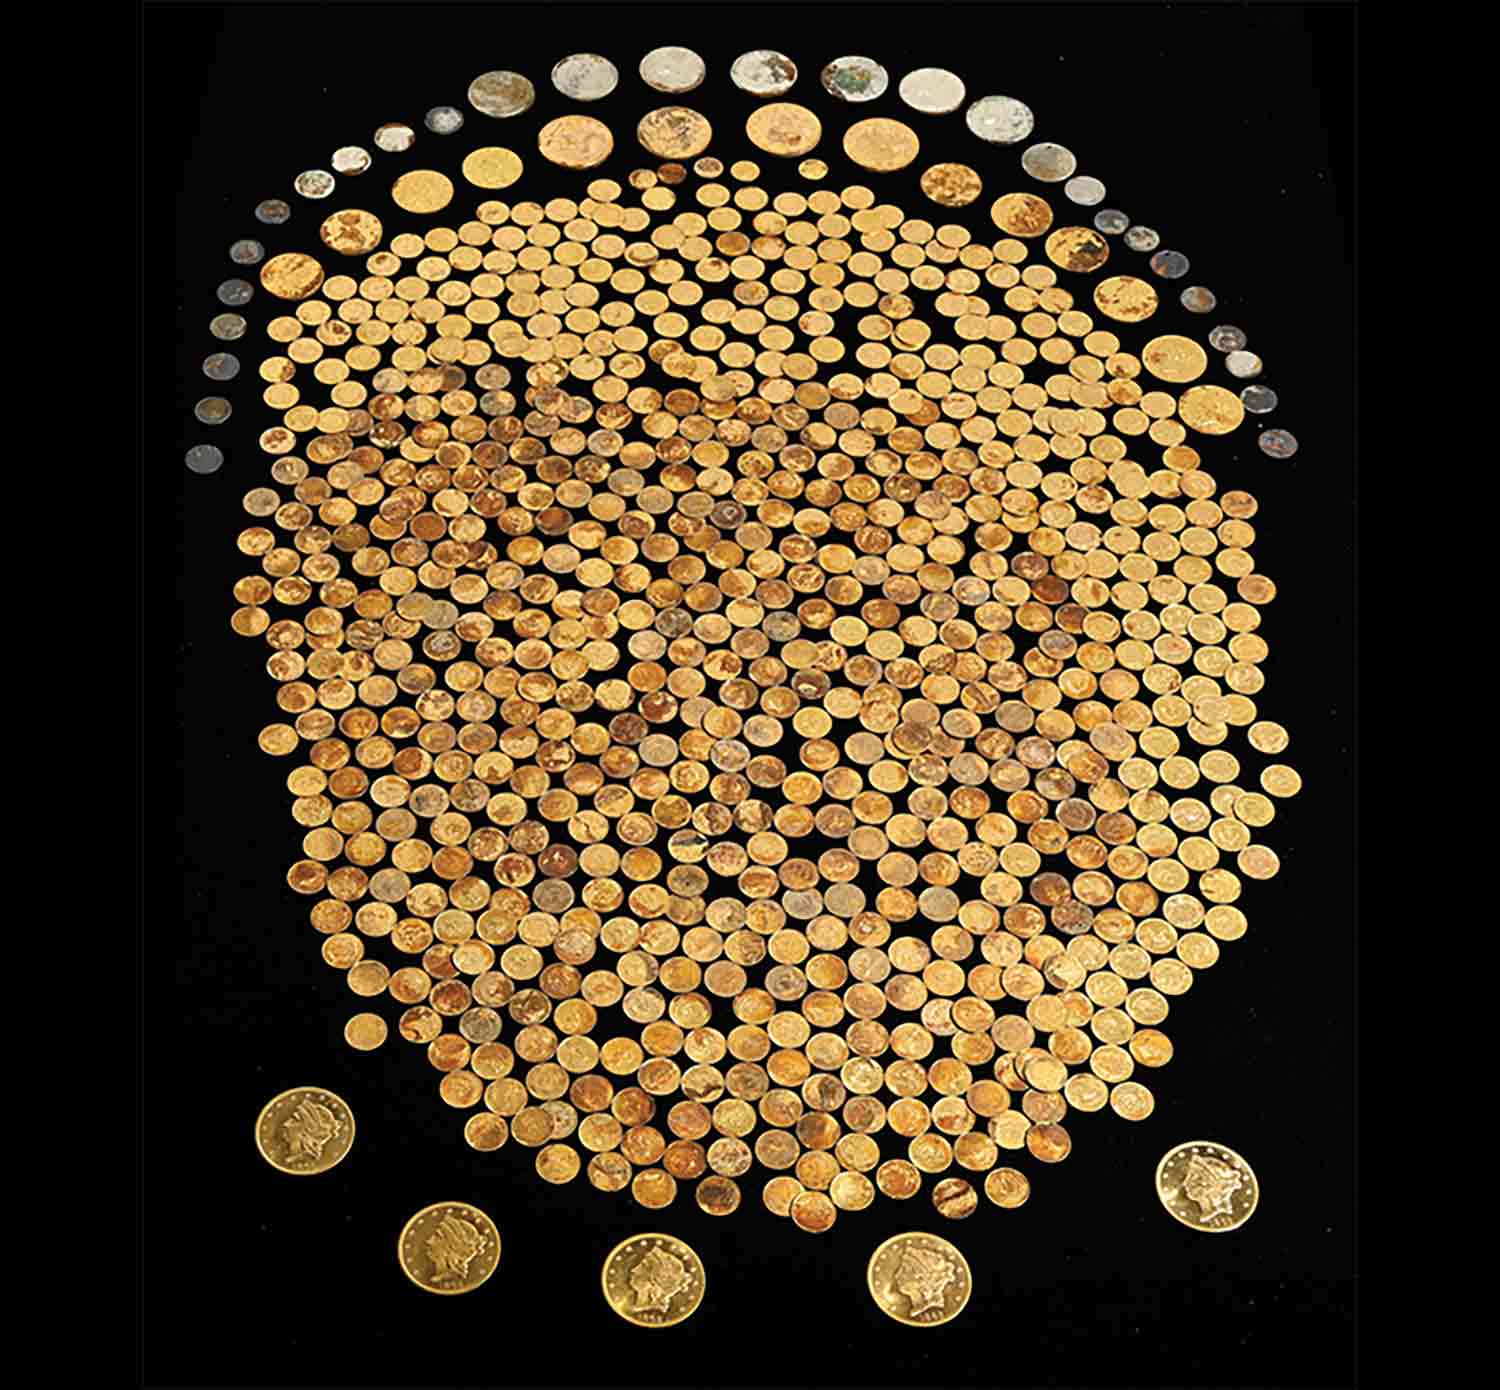 A large group of gold coins with larger gold and silver coins arranged around the pile.